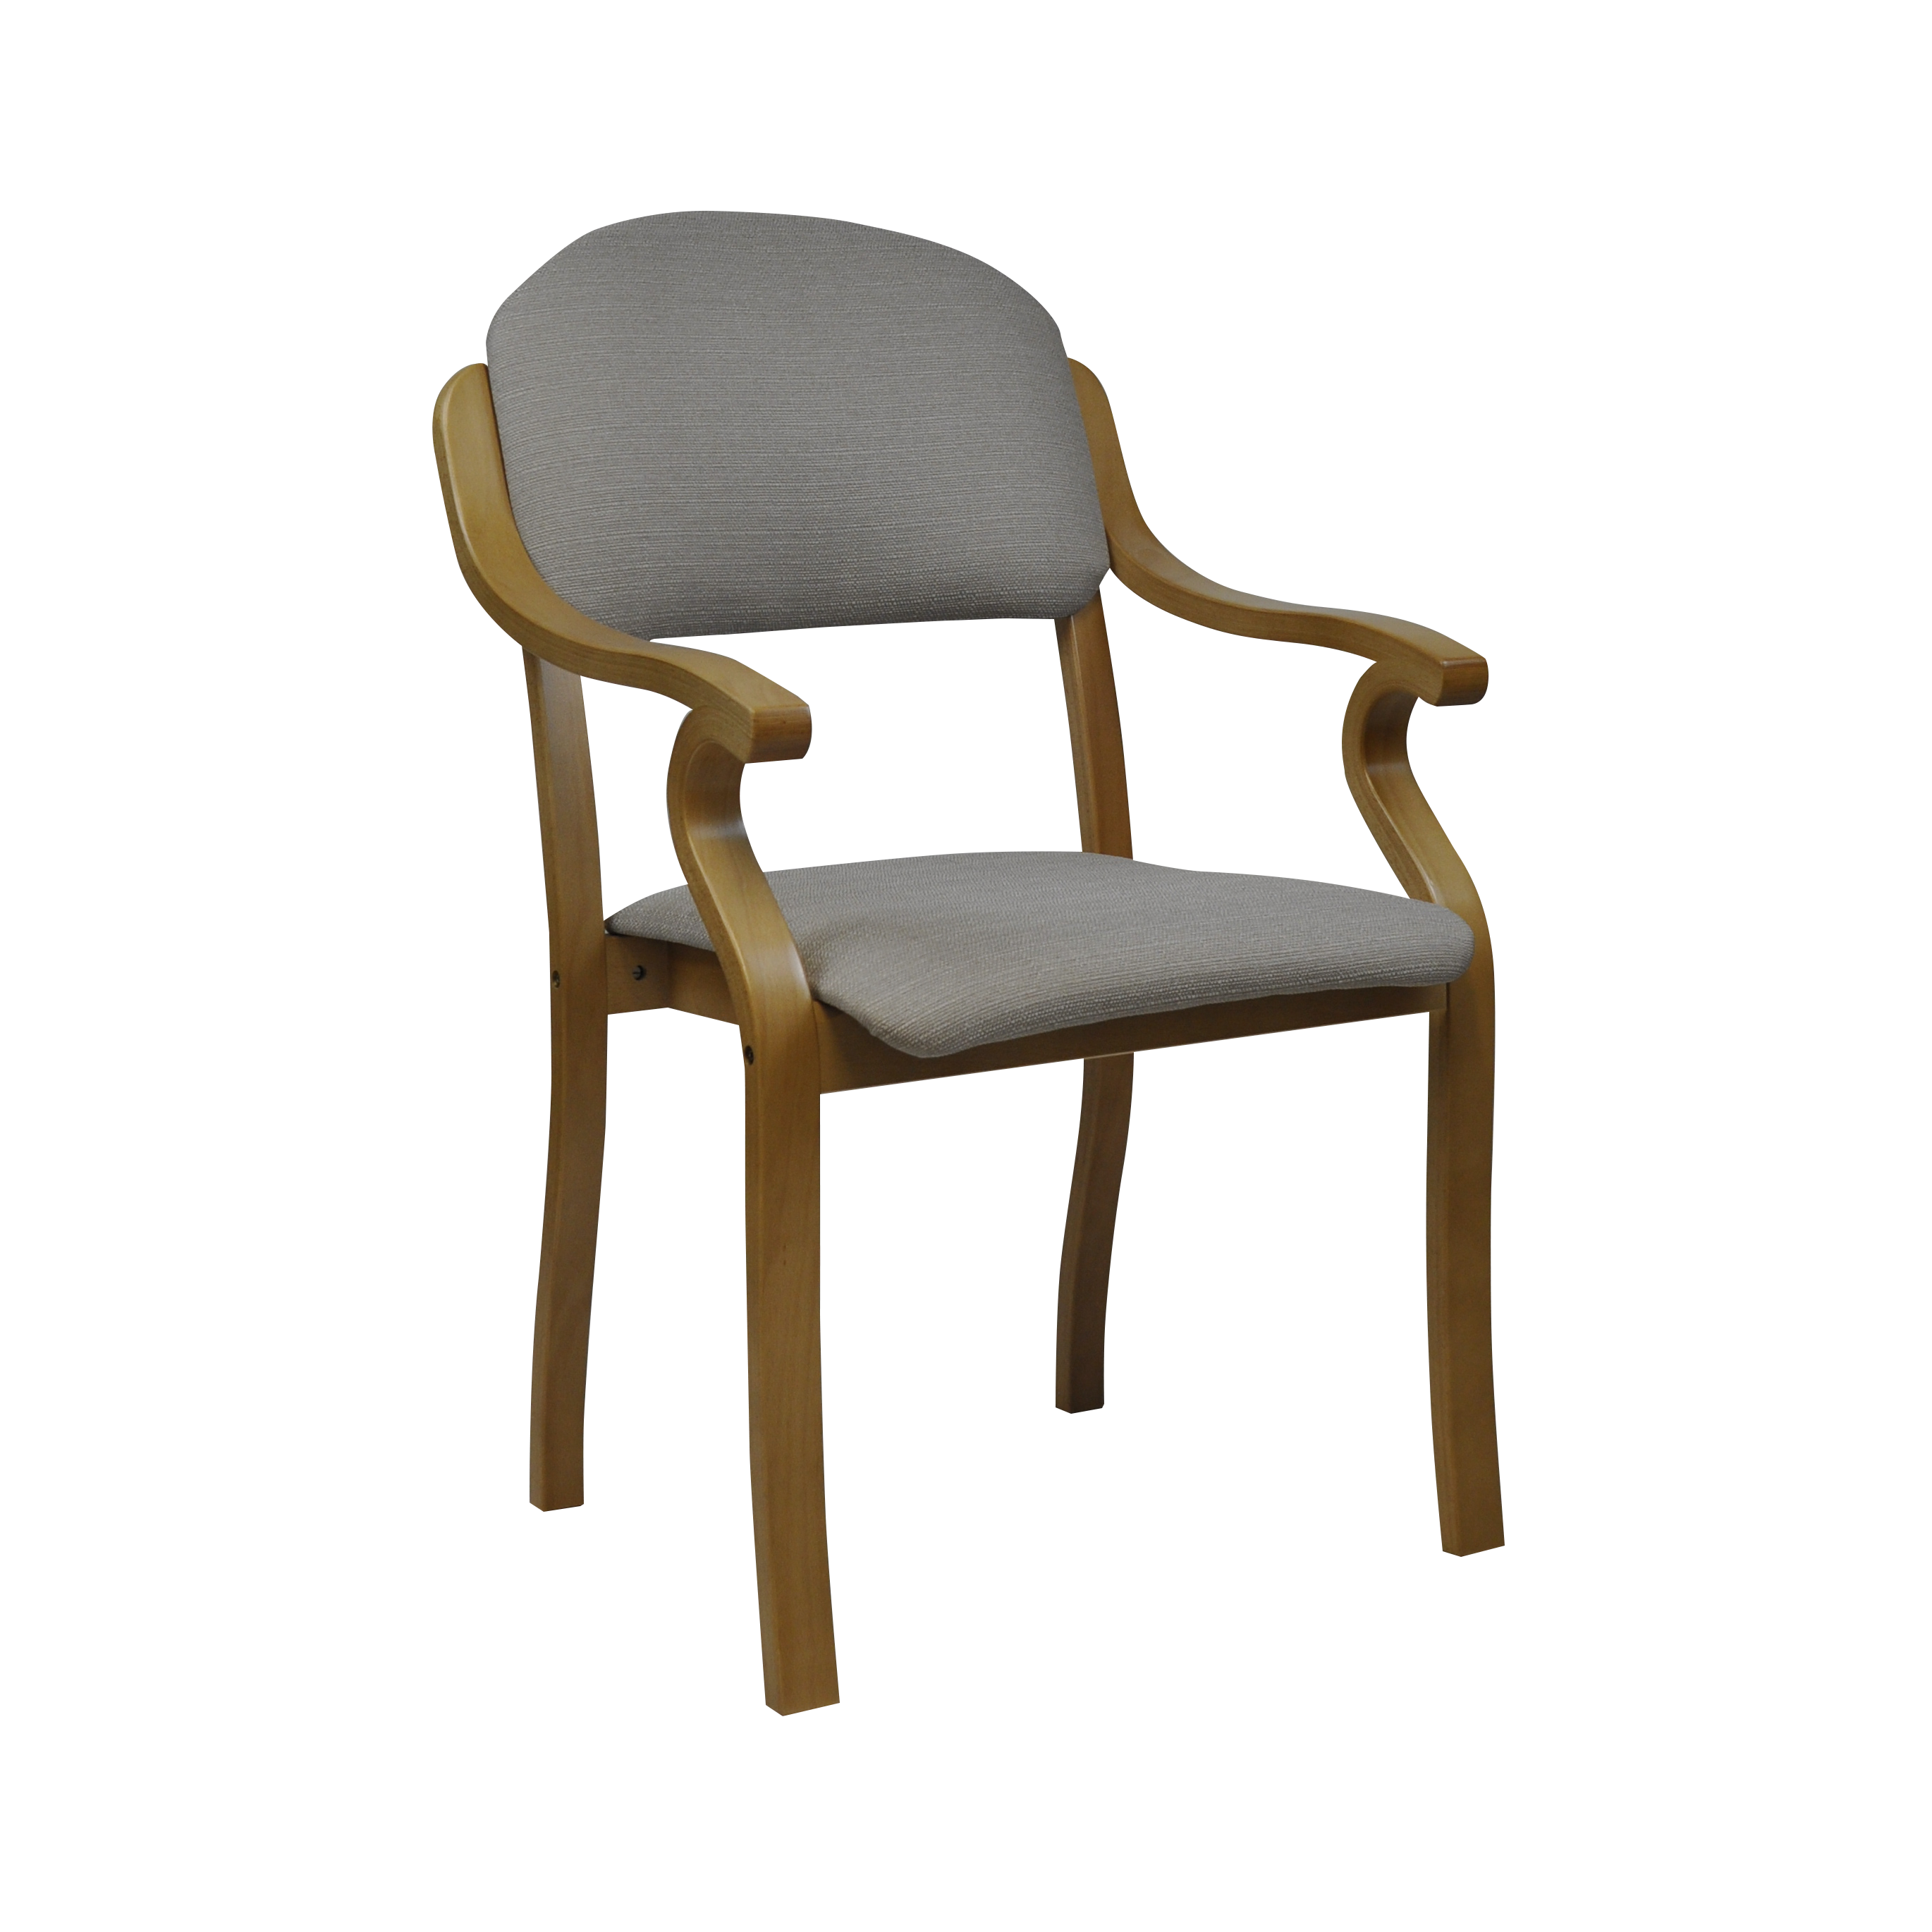 Swale Dining Chair